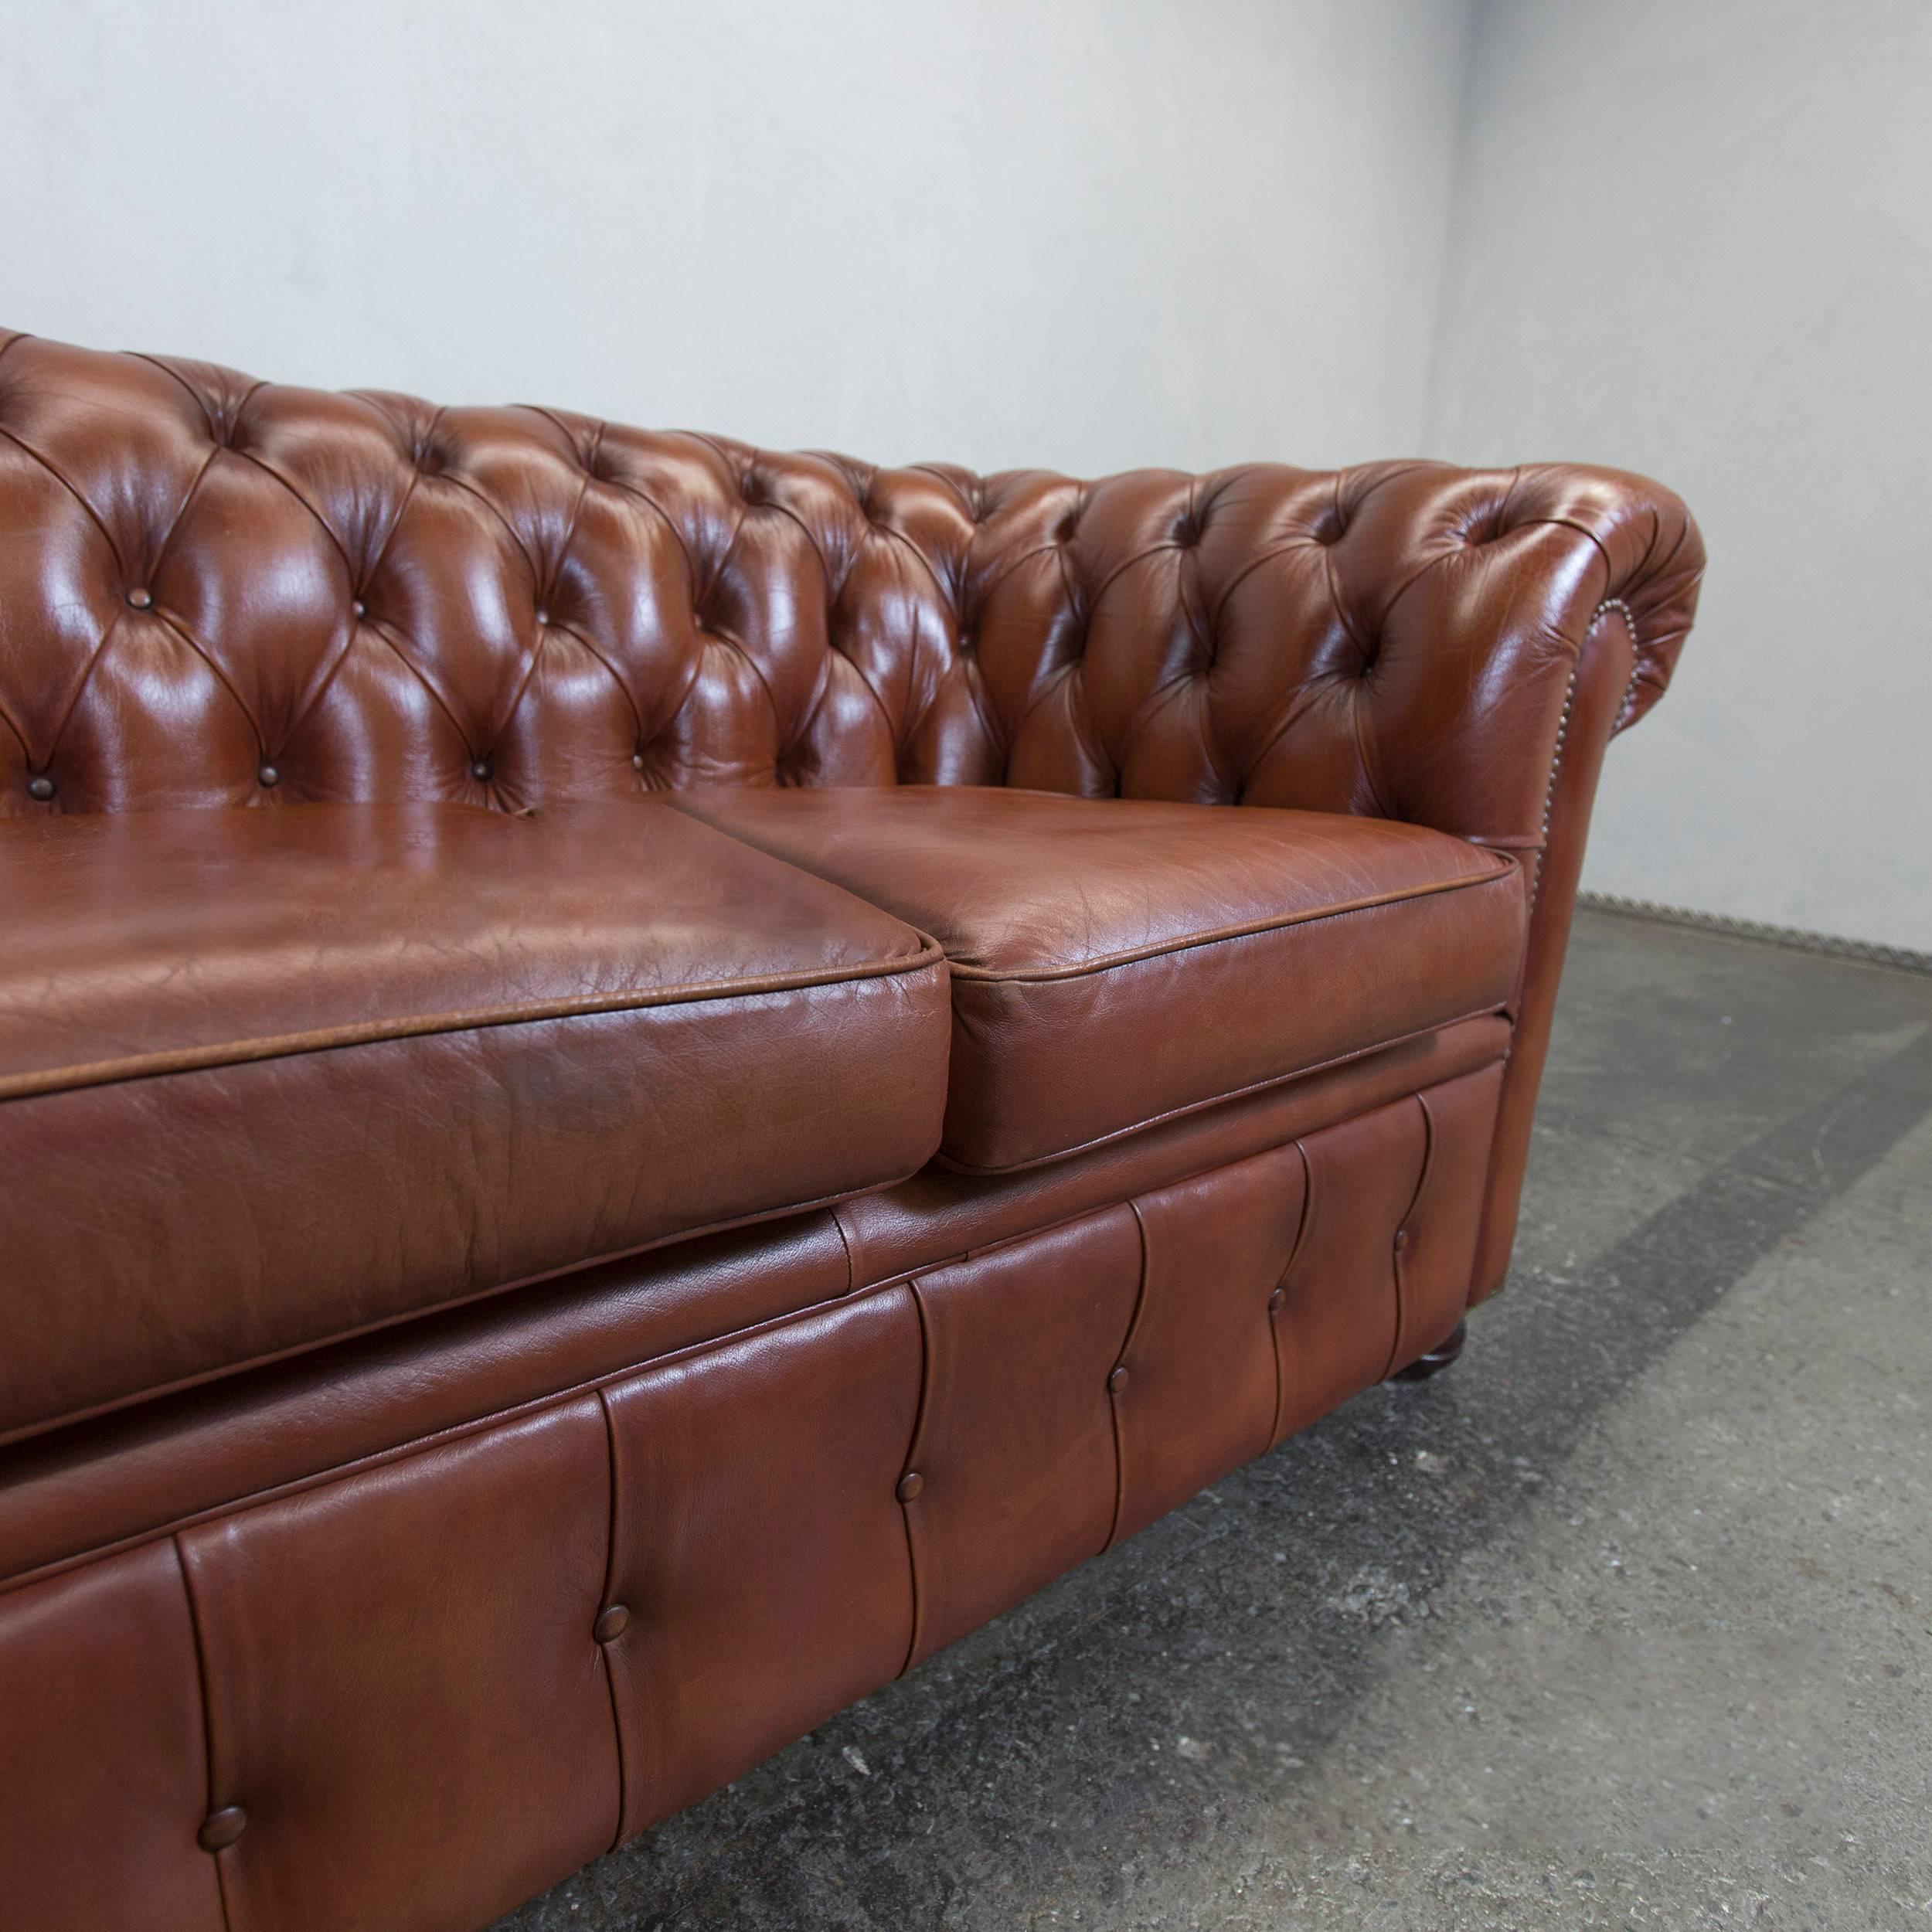 20th Century Chesterfield Leather Sofa Brown Two-Seat Couch Vintage Retro